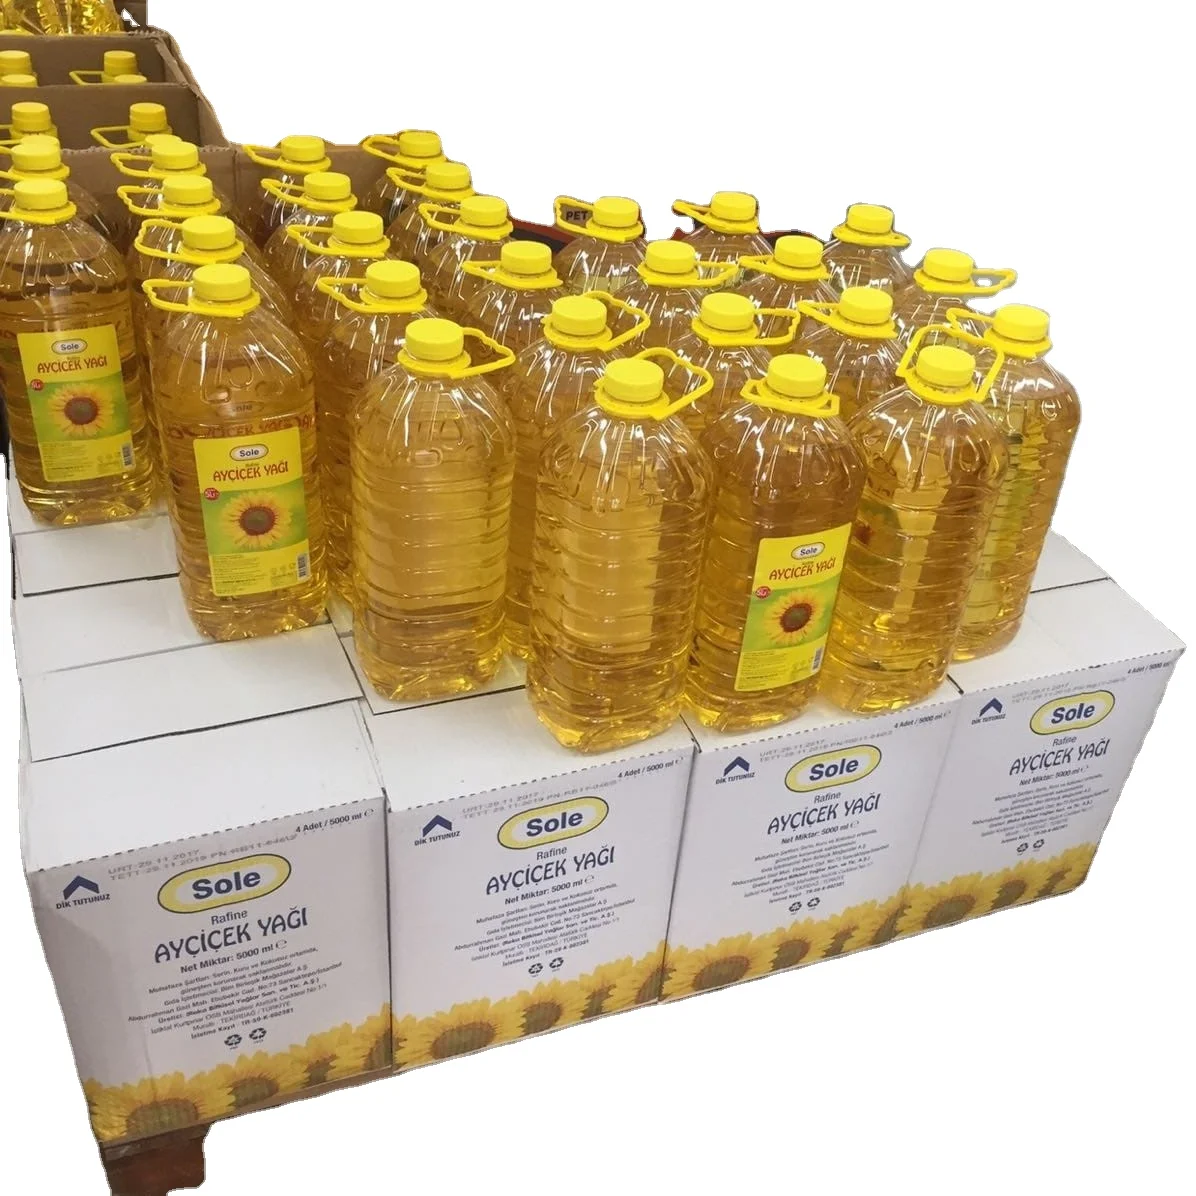 Top High Quality Refined Sun Flower Oil 100% Refined Sunflower oil For Sales